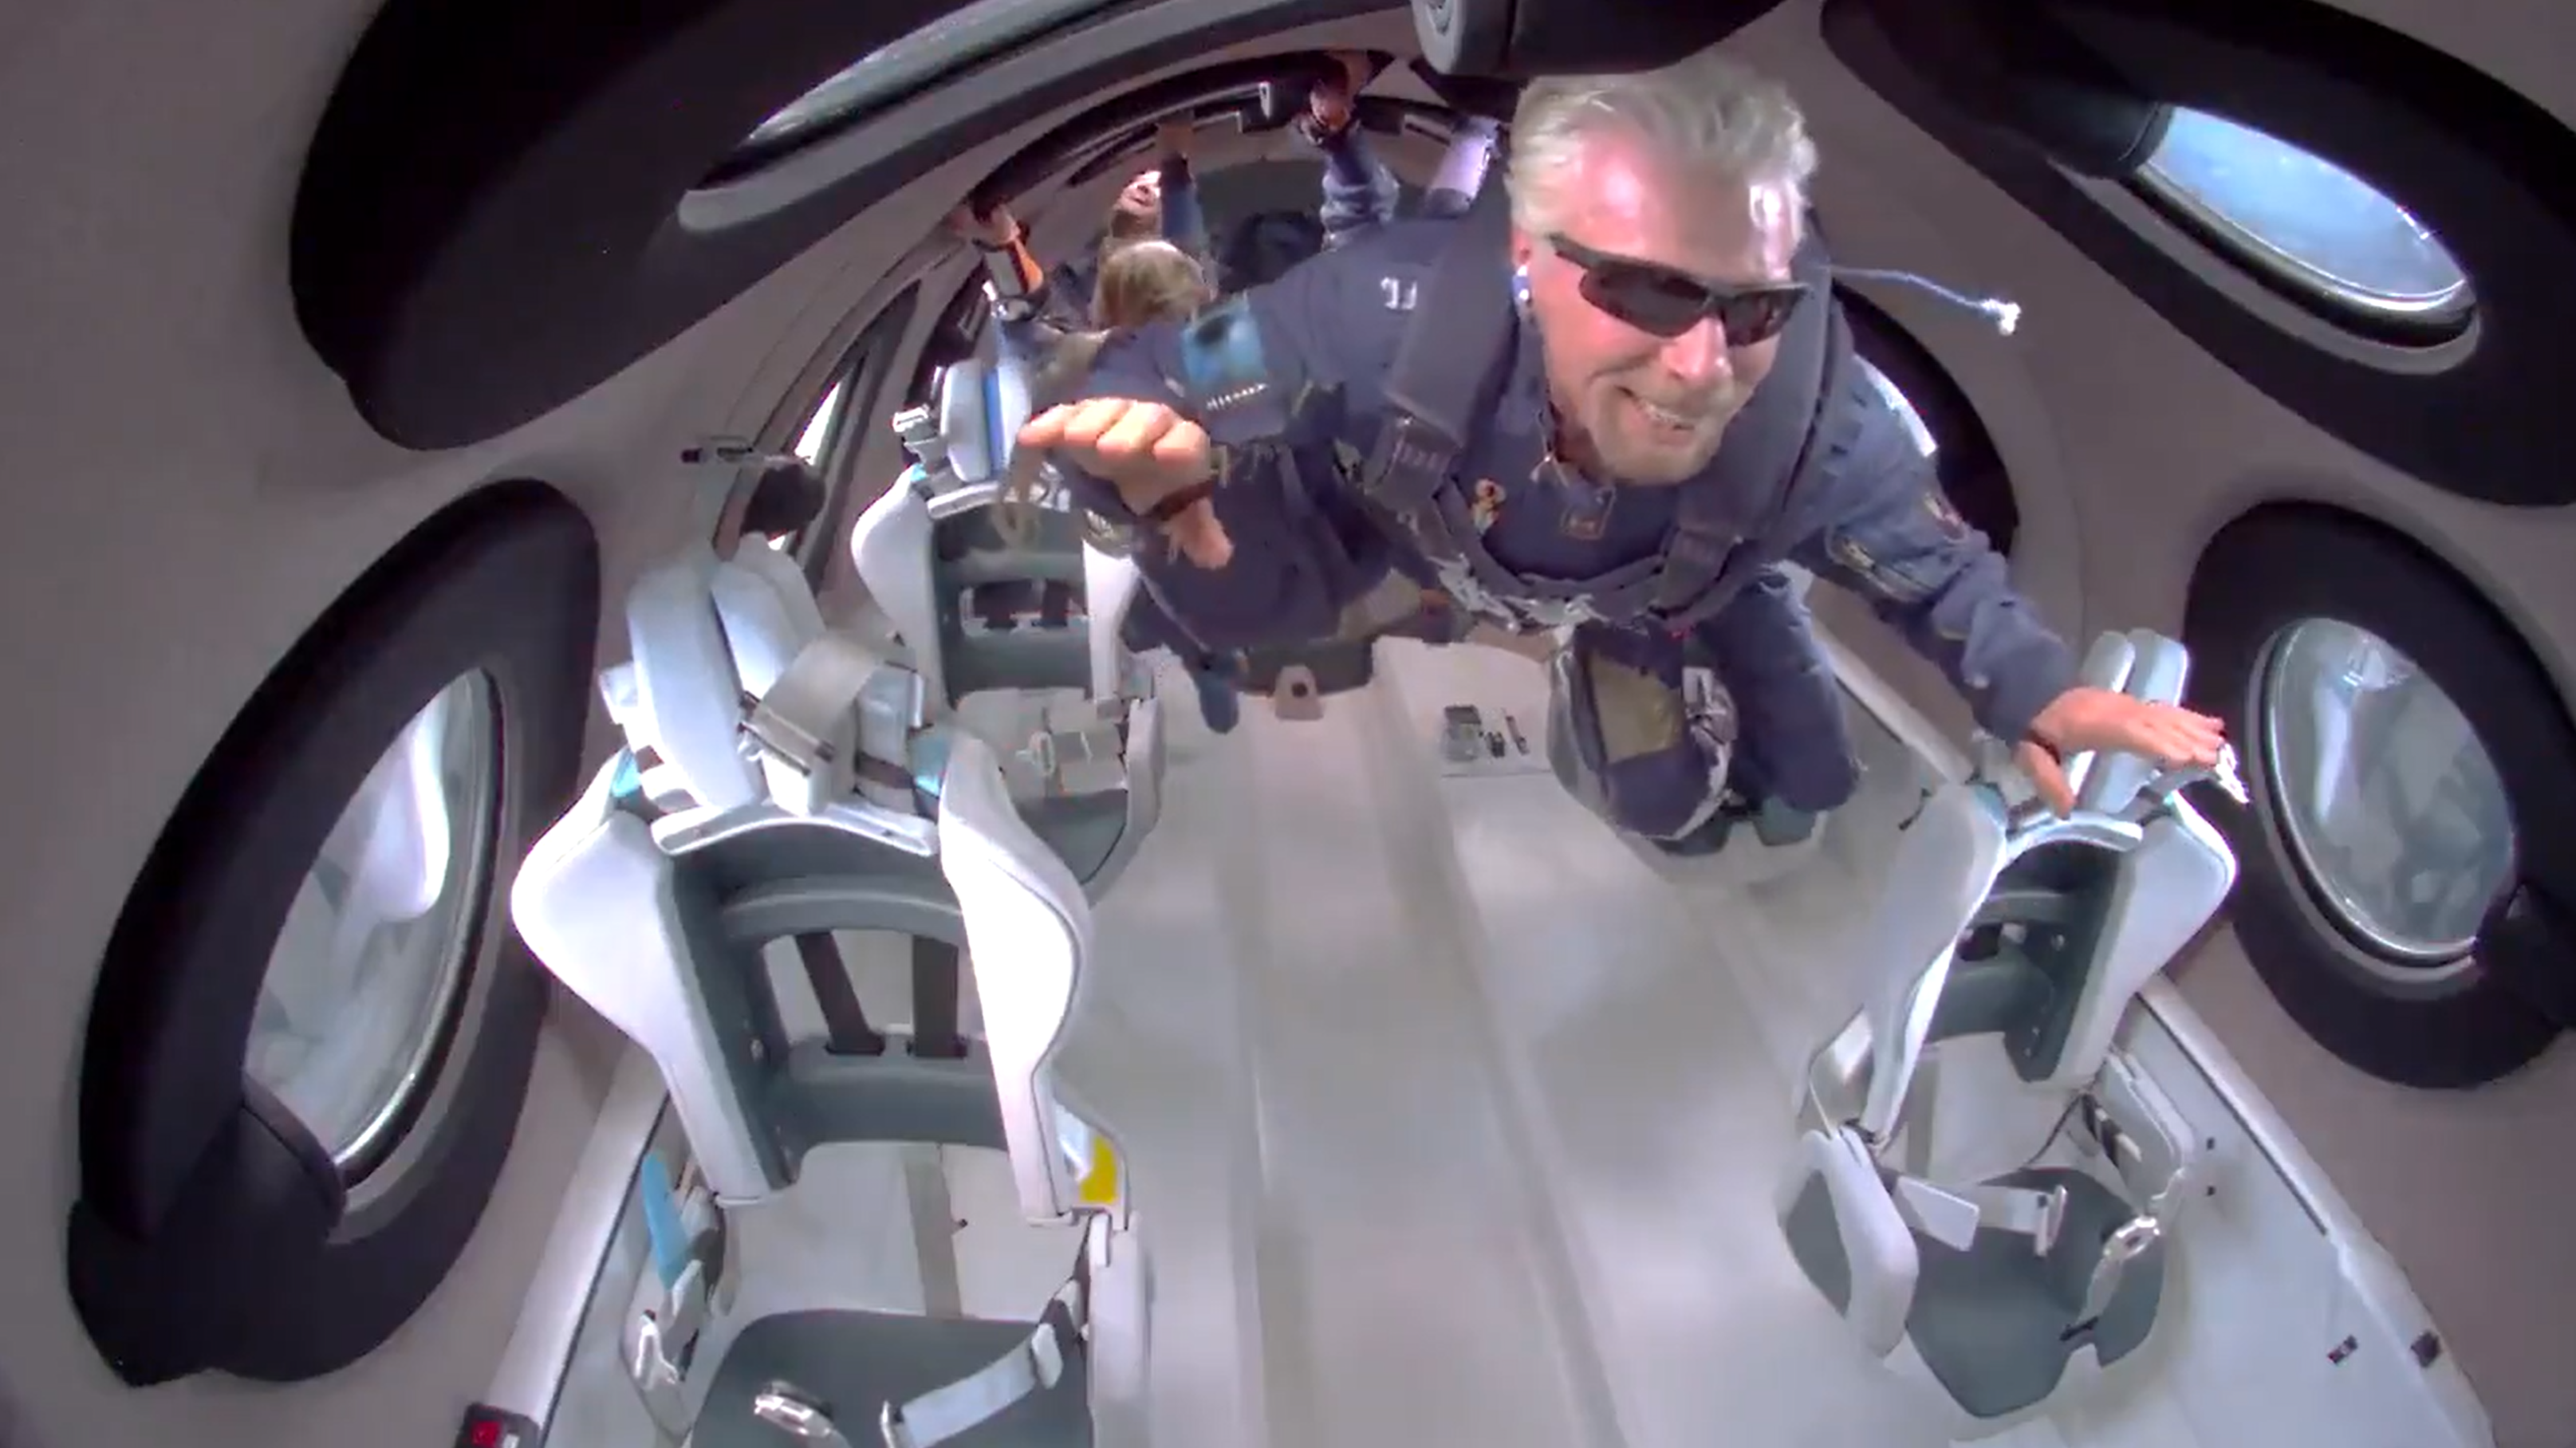 Richard Branson Soars to Edge of Space on ‘Journey of a Lifetime’ on Virgin Galactic Spaceplane Opening New Commercial Era